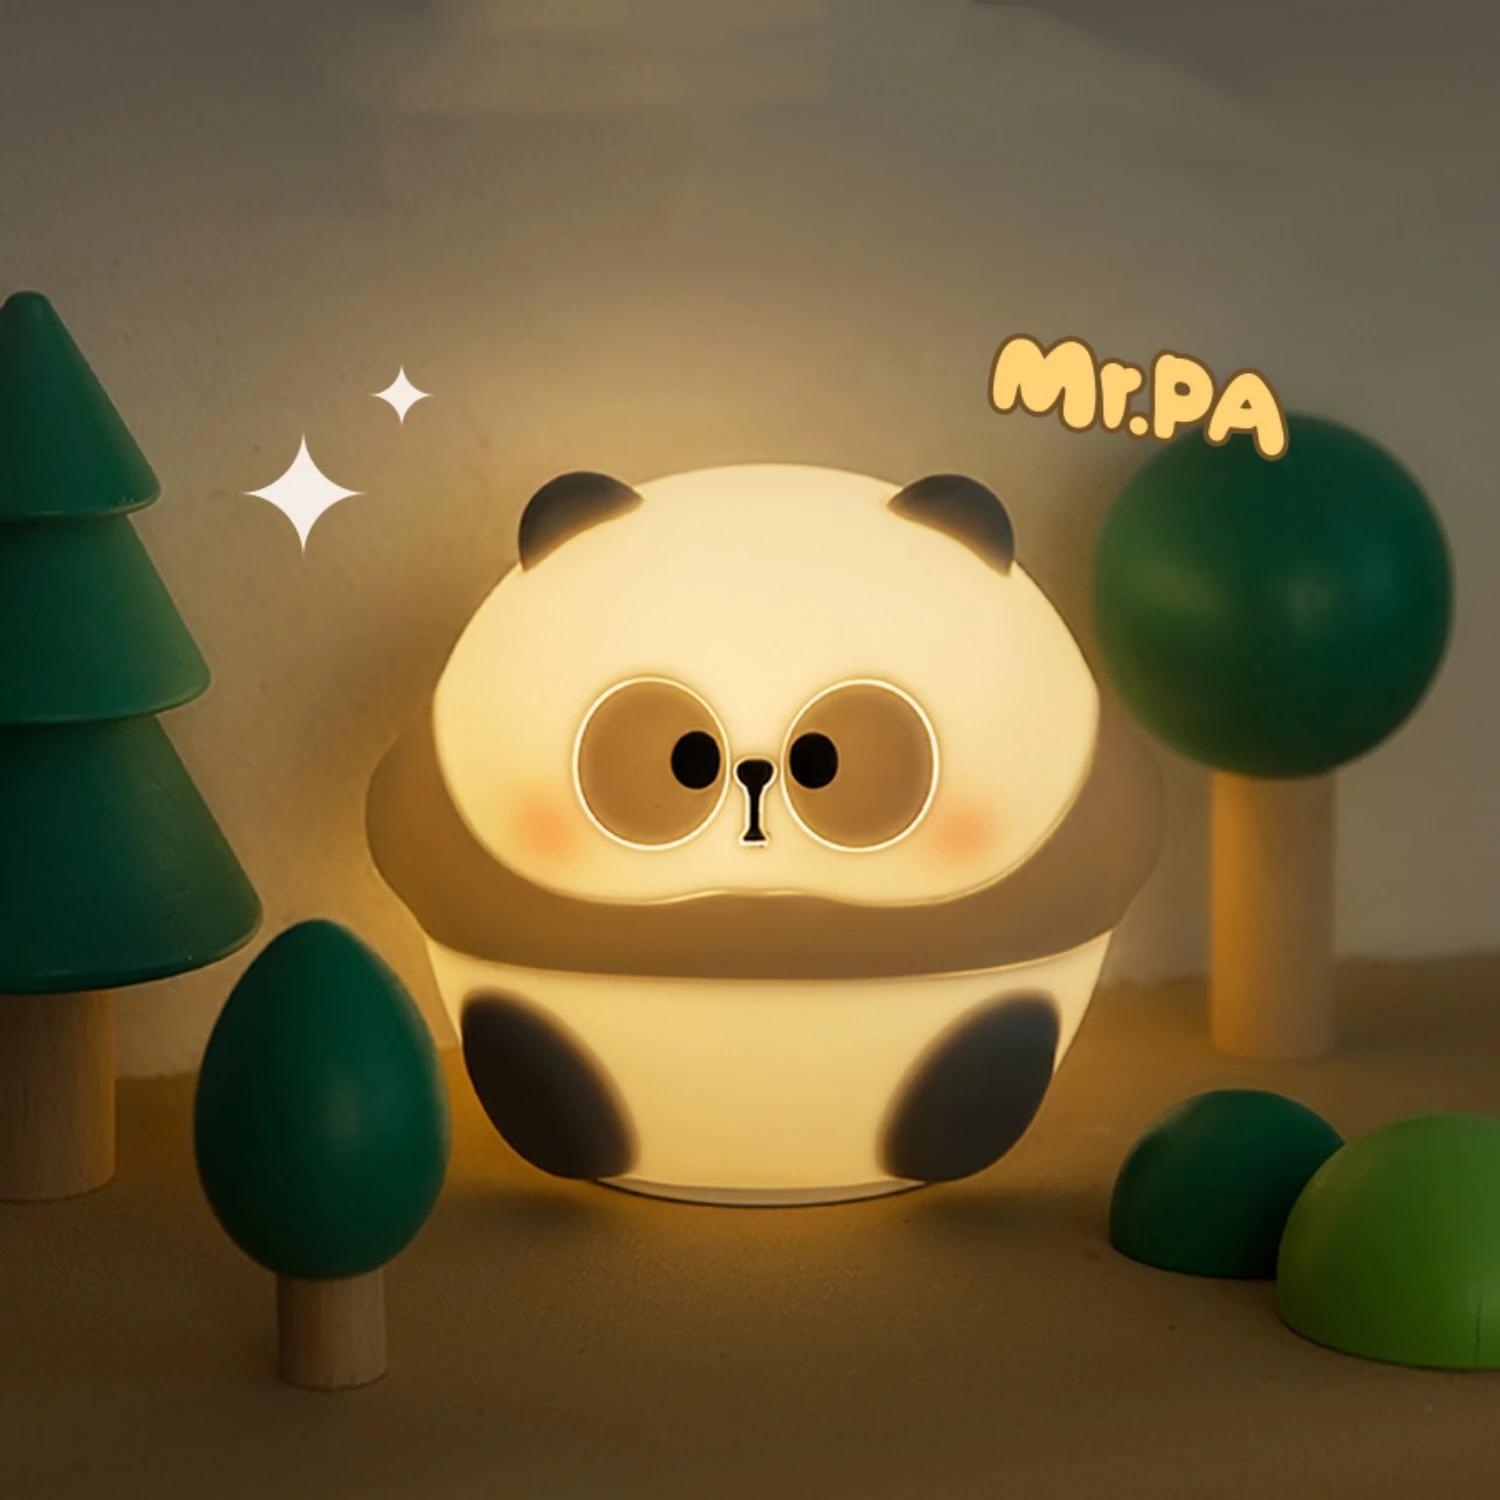 1pc LED Night Light, Cute Panda Cartoon Animals Silicone Lamp, USB Rechargeable Timing Sleeping Lamp, Creative Bedroom Bedside Lamp, For Home Decoration Festival/Birthday Gifts details 7